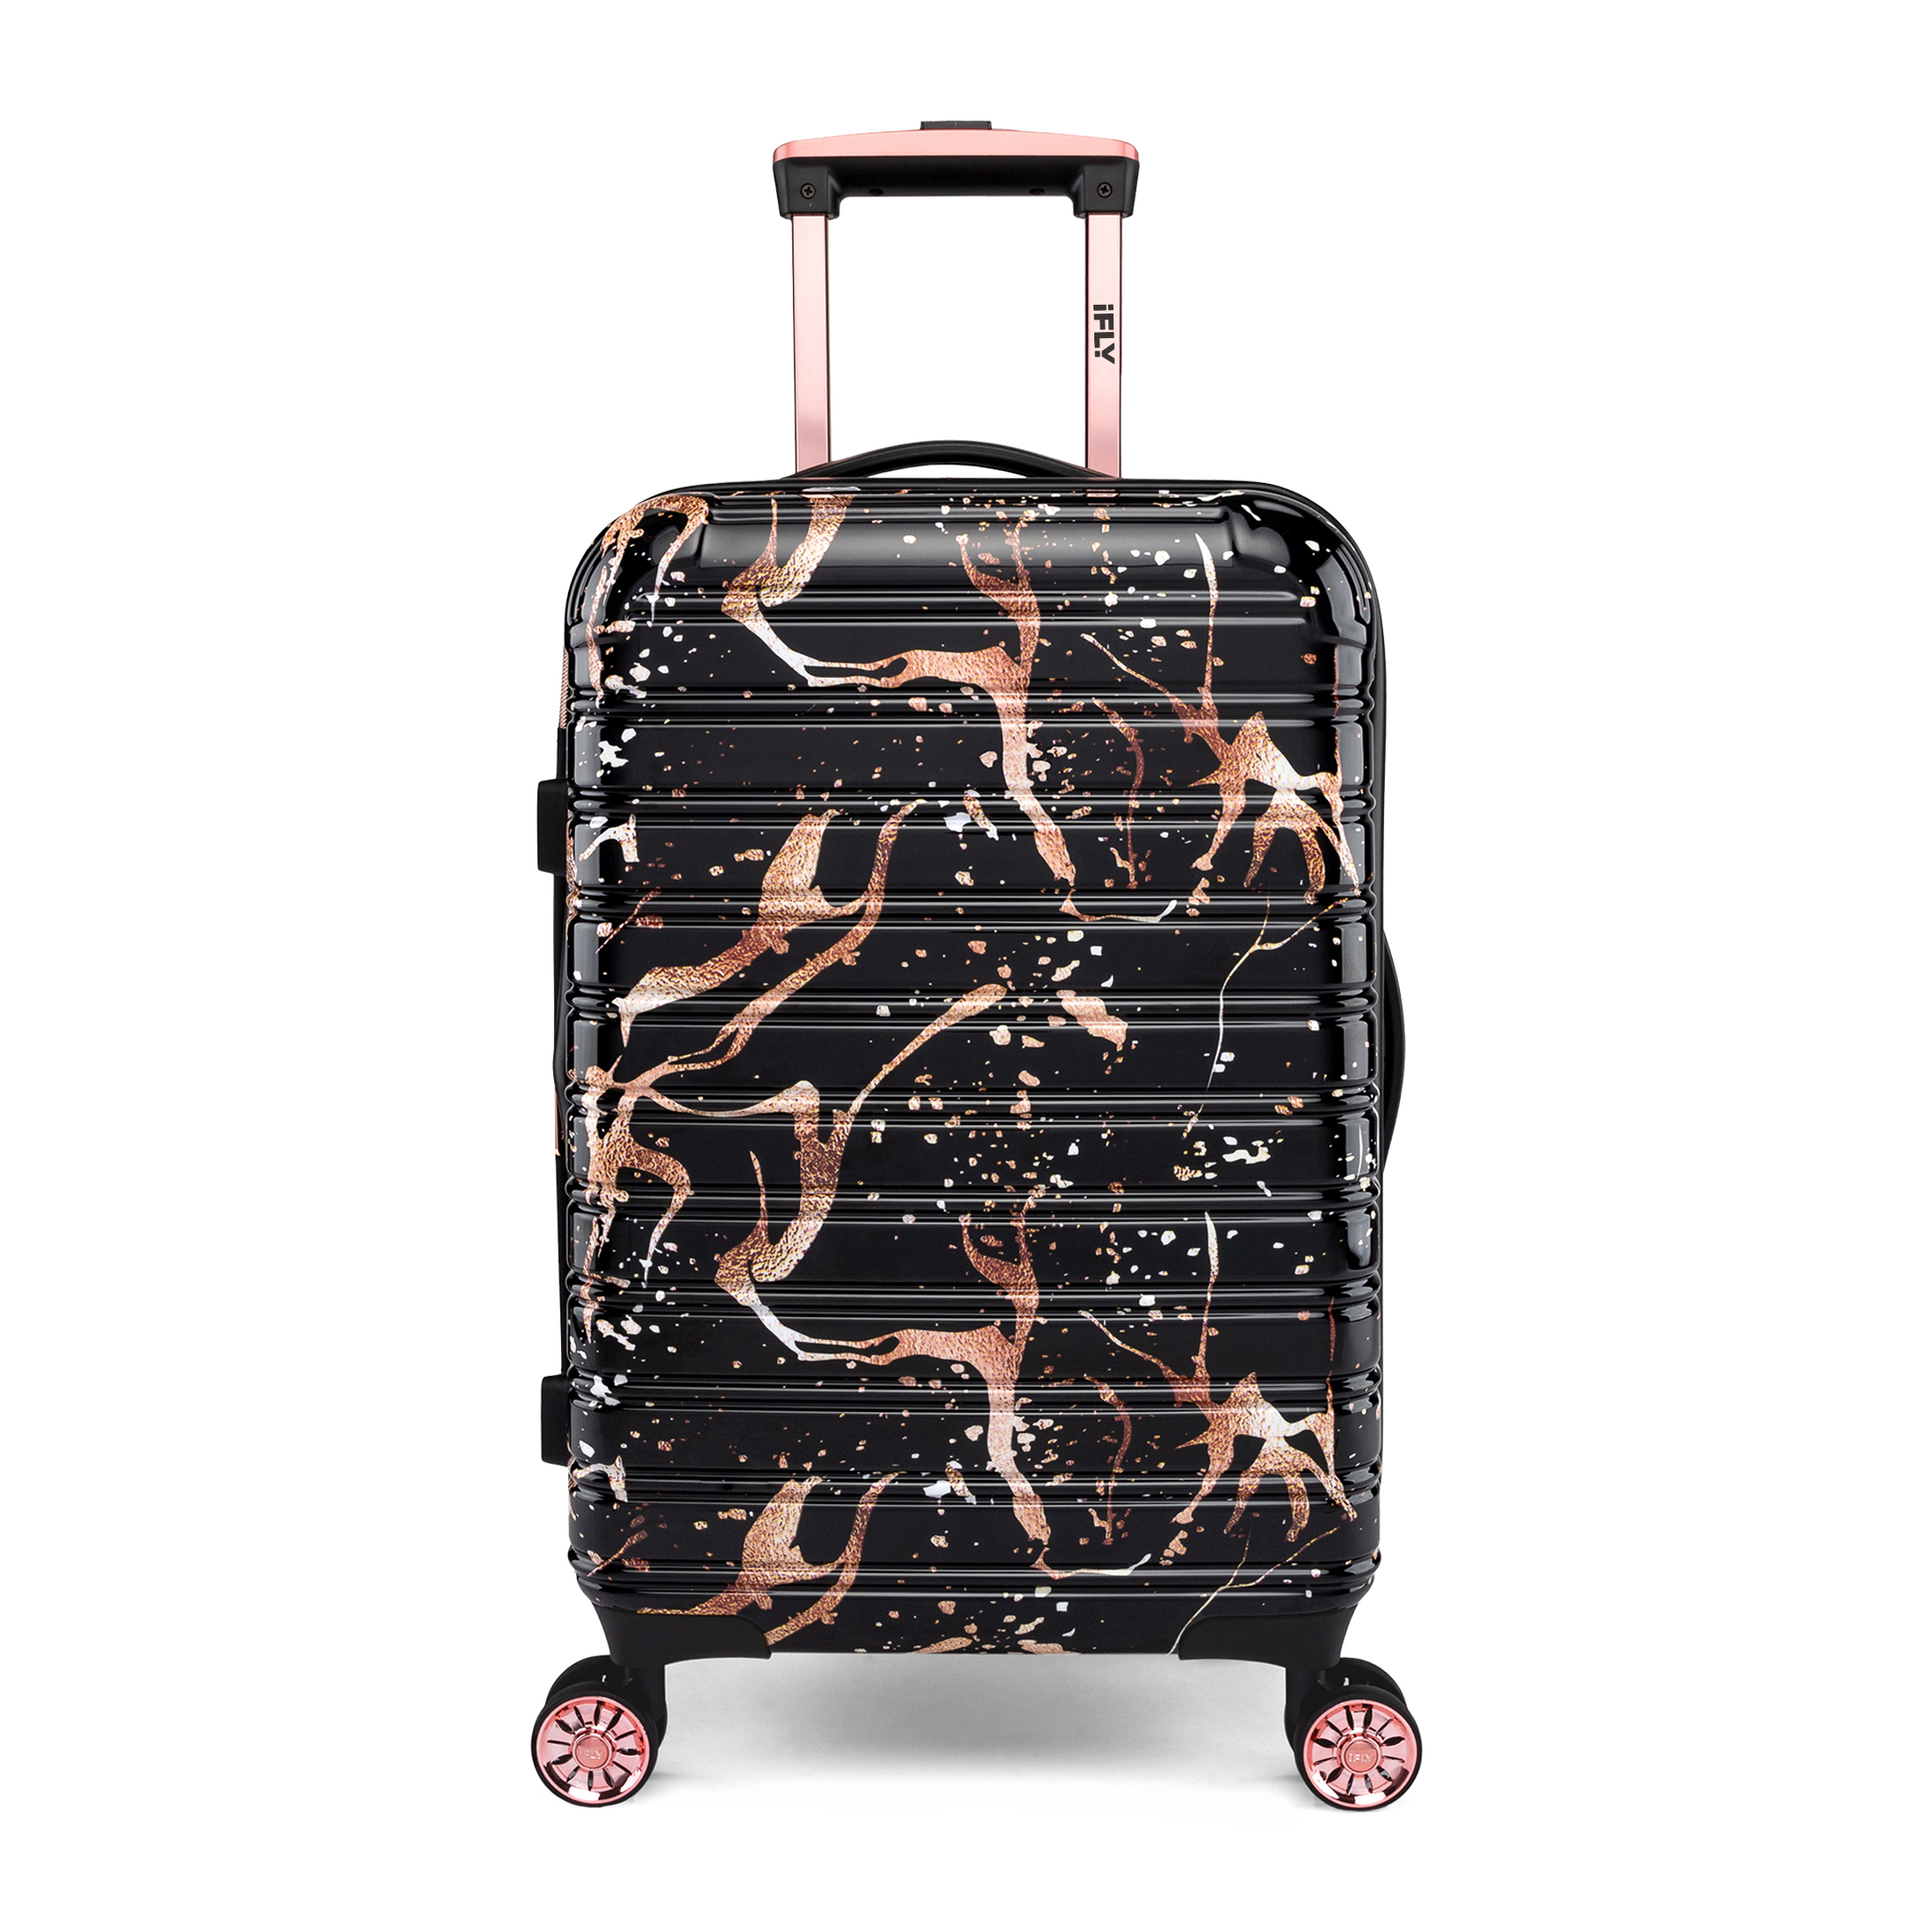 IFLY - Fibertech Marble Hardside Luggage 20 Inch Carry-on,  Black/Rose Gold - image 1 of 7